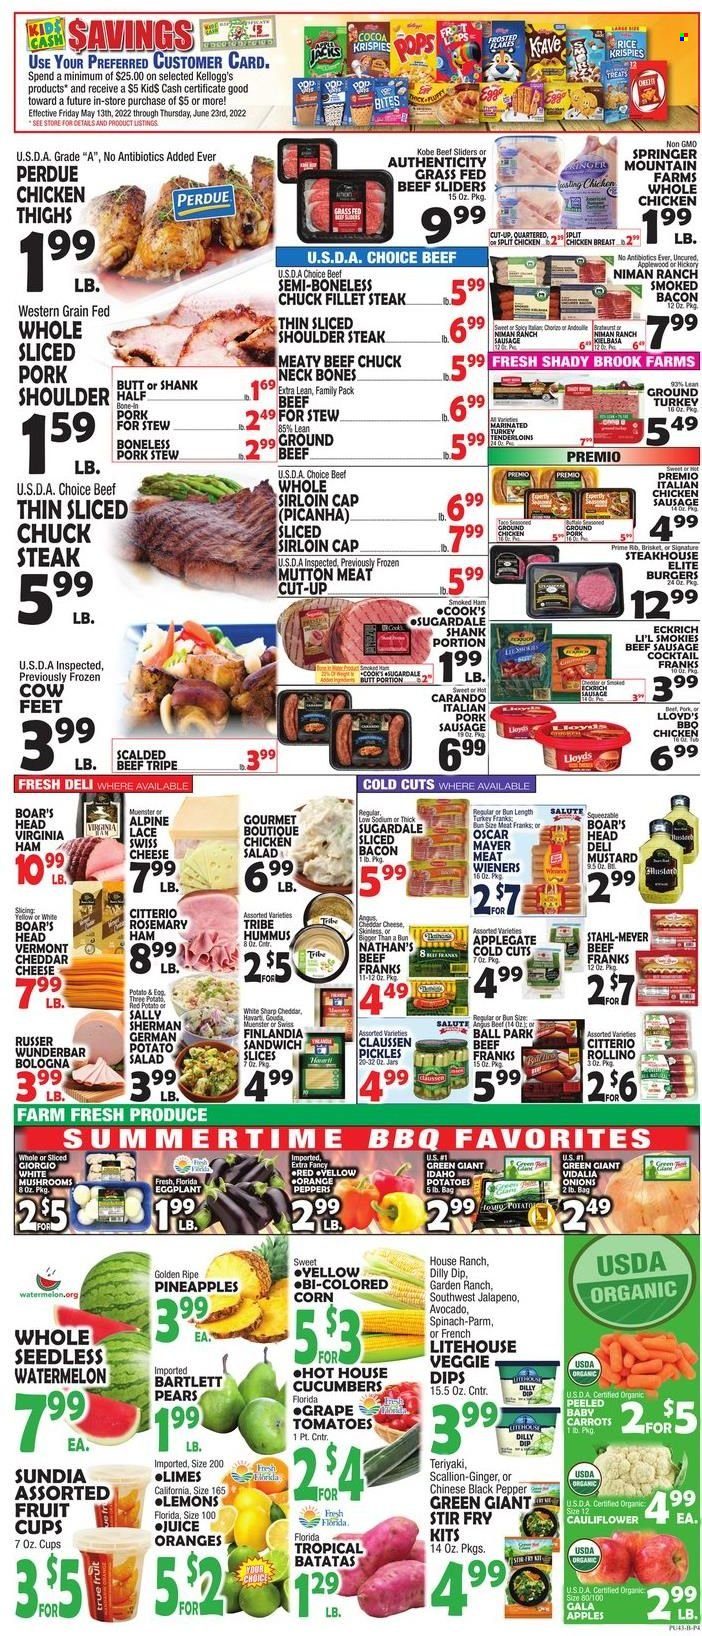 thumbnail - Bravo Supermarkets Flyer - 05/20/2022 - 05/26/2022 - Sales products - mushrooms, carrots, corn, cucumber, ginger, sweet potato, tomatoes, potatoes, onion, salad, peppers, jalapeño, eggplant, apples, avocado, Bartlett pears, Gala, limes, watermelon, pineapple, pears, oranges, fruit cup, sandwich, hamburger, Perdue®, Sugardale, bacon, ham, smoked ham, bologna sausage, virginia ham, Oscar Mayer, pork sausage, chicken sausage, hummus, potato salad, chicken salad, gouda, sandwich slices, swiss cheese, cheddar, cheese, Münster cheese, dip, Kellogg's, cocoa, pickles, Rice Krispies, rosemary, black pepper, mustard, juice, ground turkey, whole chicken, chicken breasts, chicken thighs, beef meat, beef tripe, steak, chuck steak, cap of rump, pork meat, pork shoulder, mutton meat, lemons. Page 5.